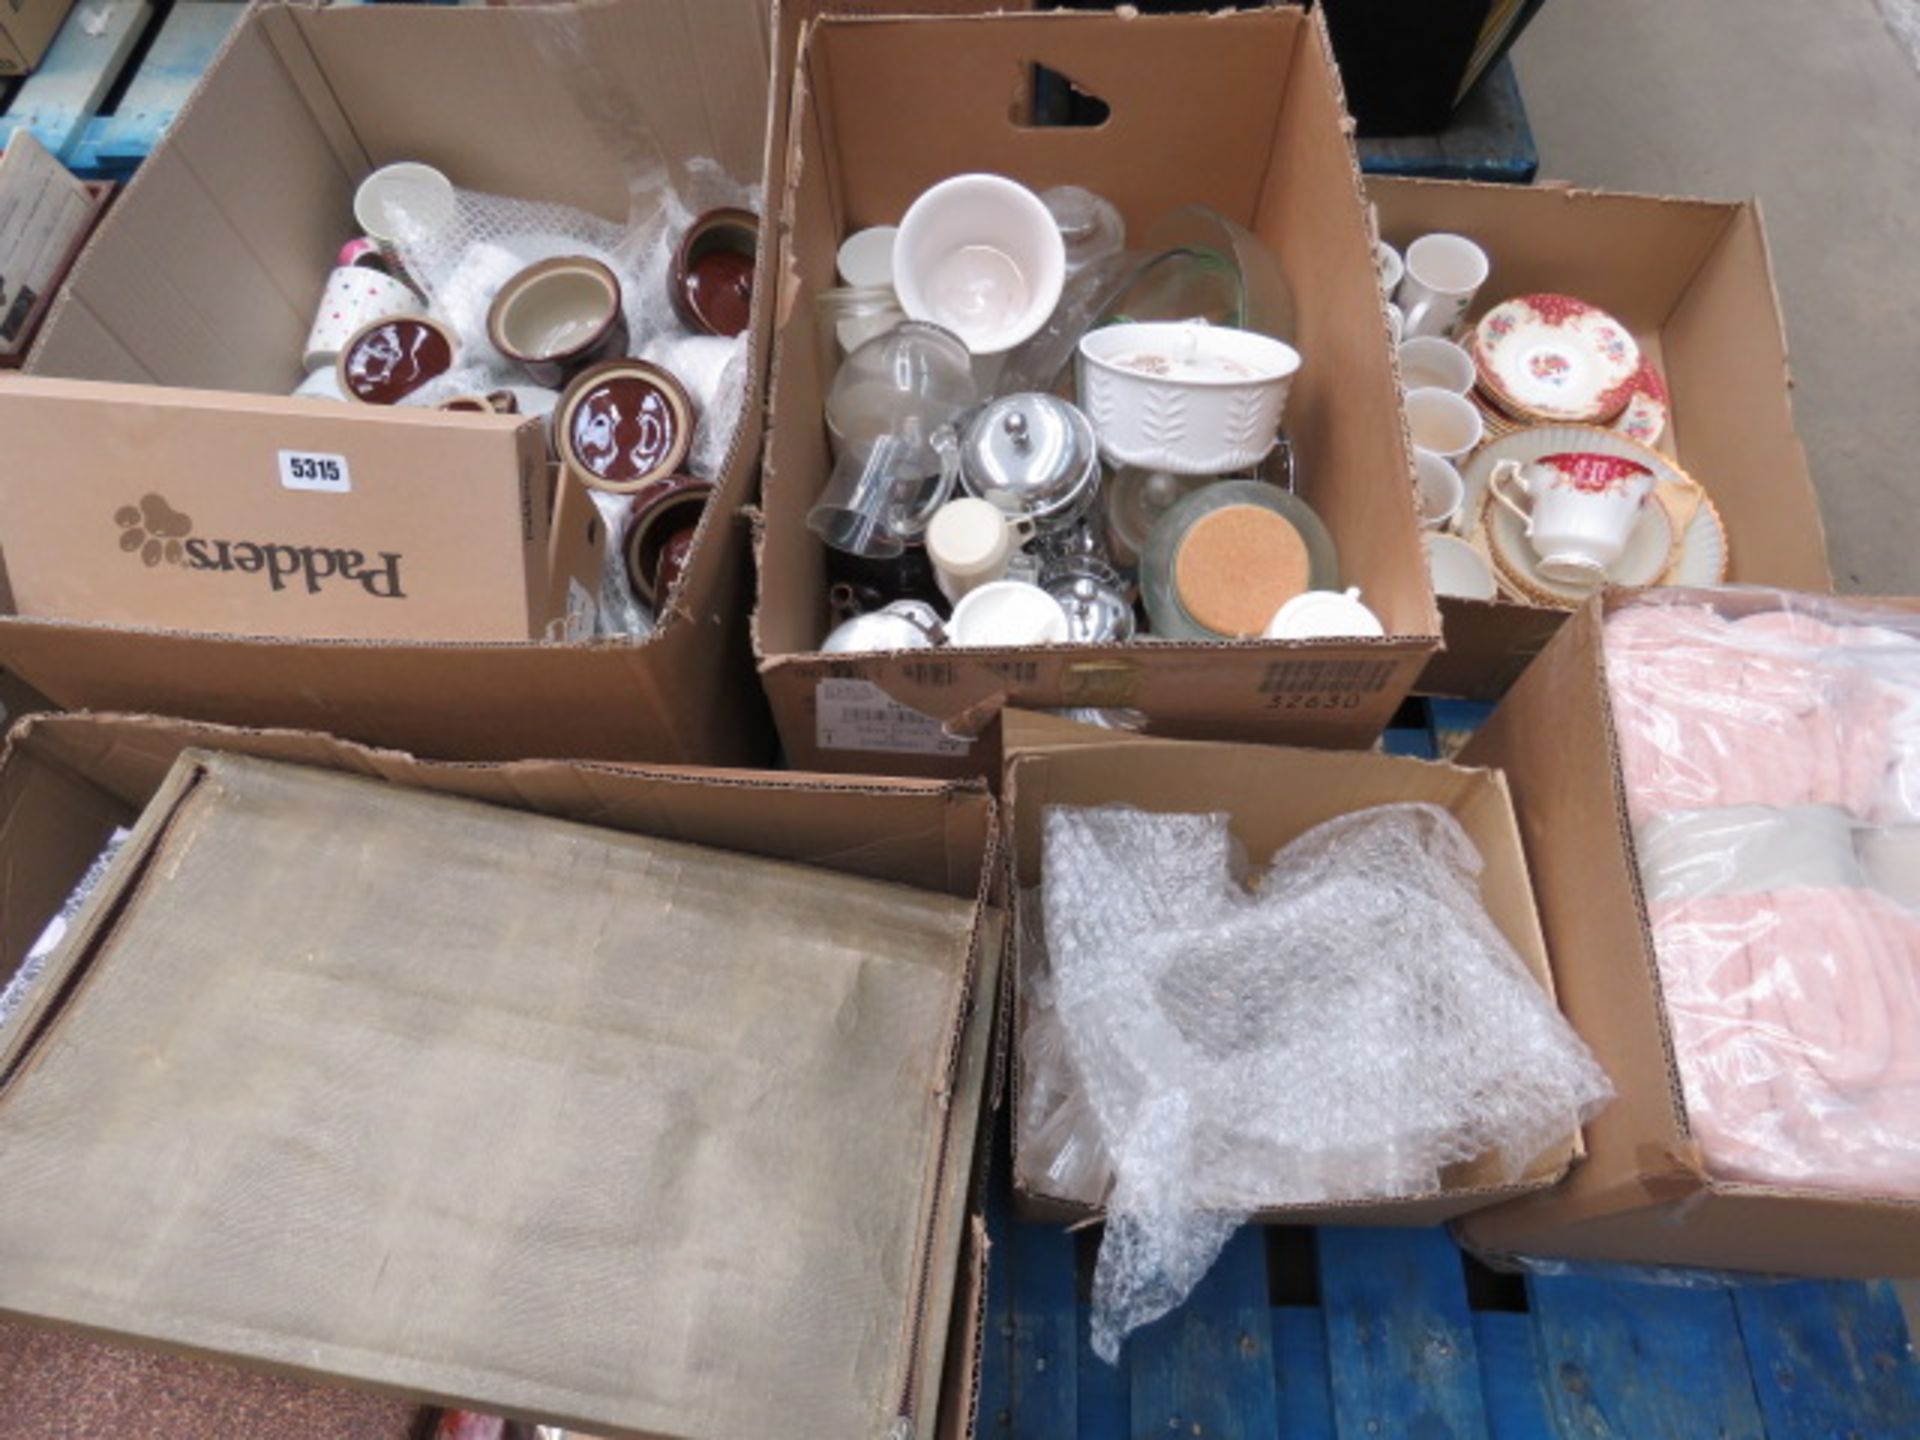 Pallet with large quantity of household crockery, glassware, bathroom towels, and cutlery sets